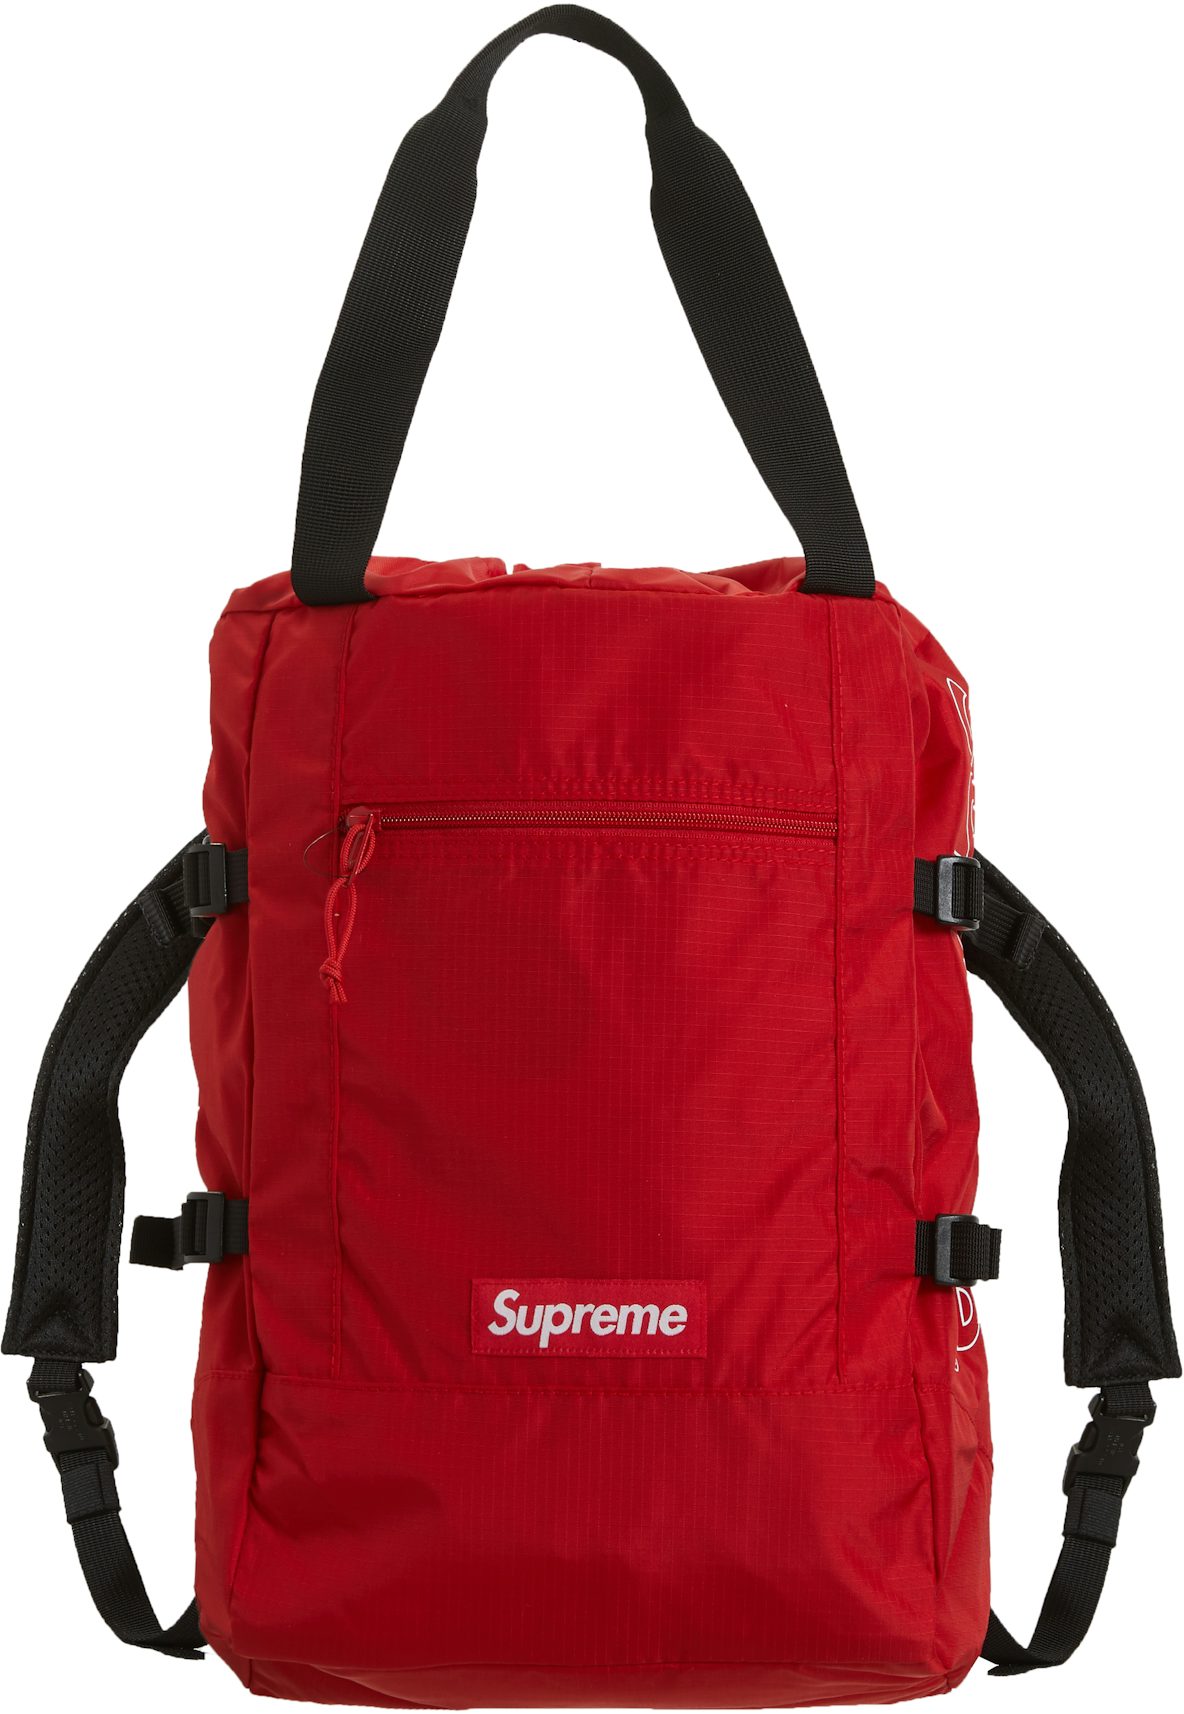 Shop Supreme 2019 SS 19SS ◇ Supreme Tote Backpack Tote bag box logo Red (Tote  Backpack) by micce